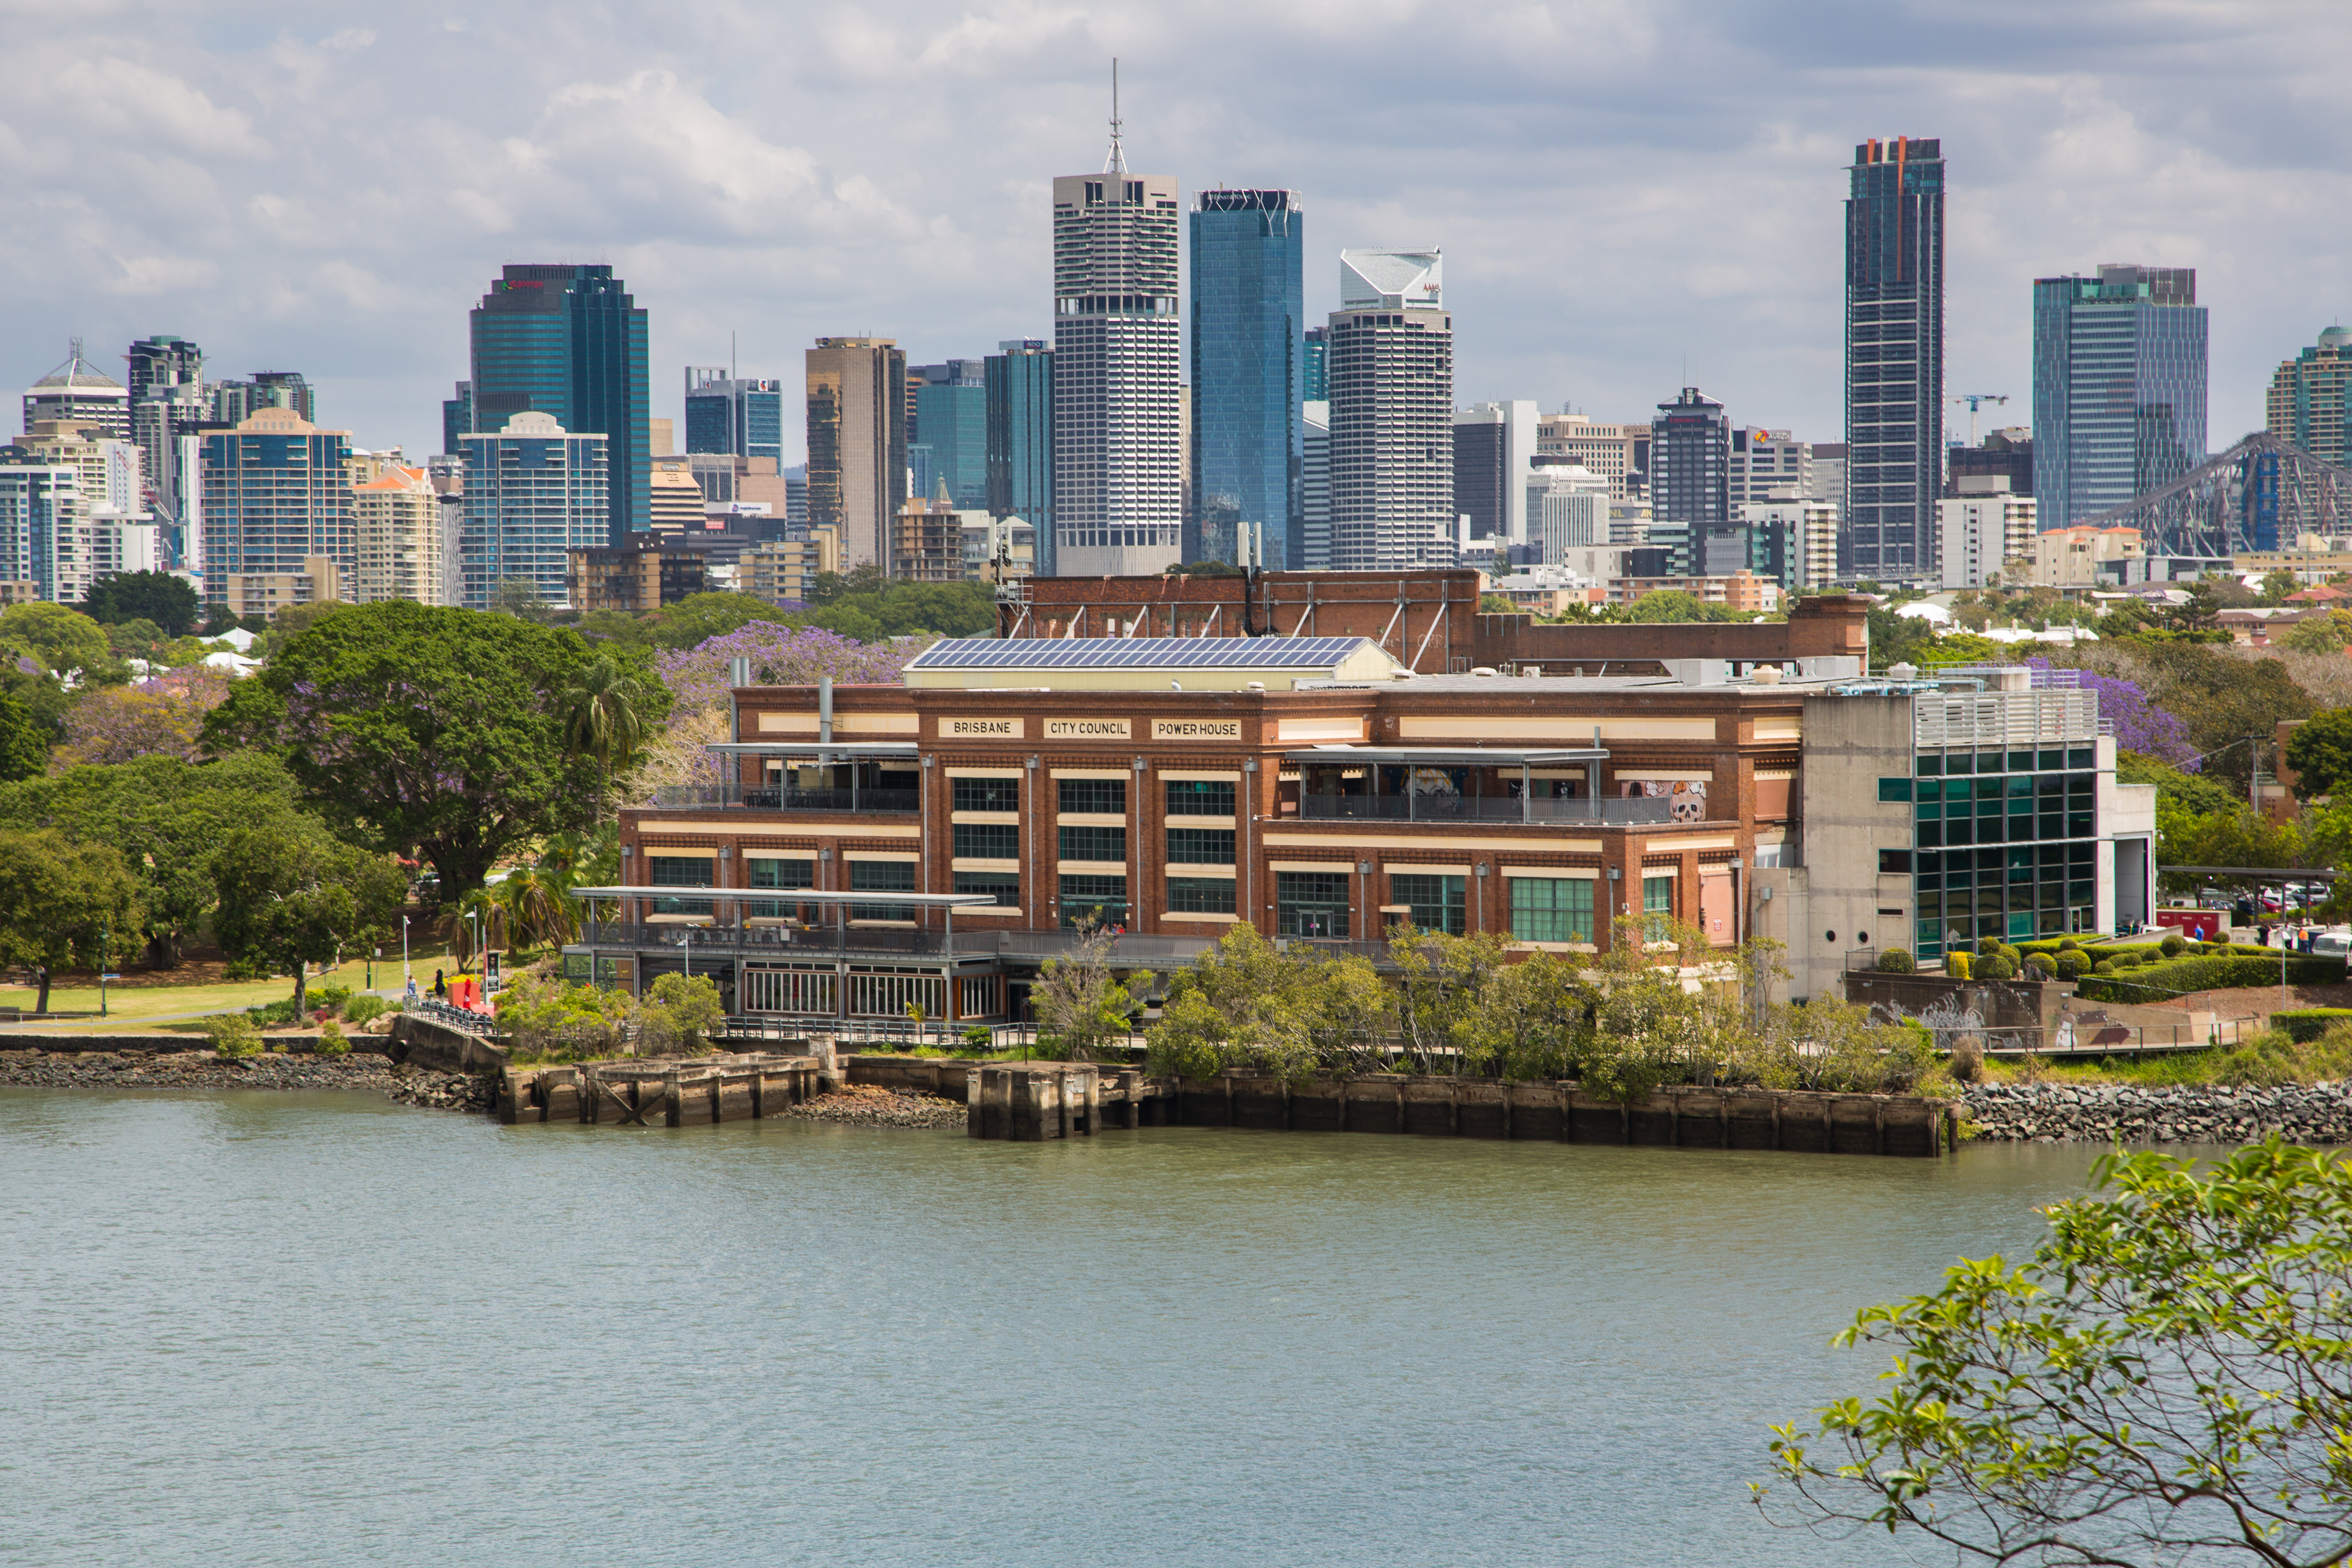 This is an image of the New Farm Powerhouse from Bulimba across the Brisbane River